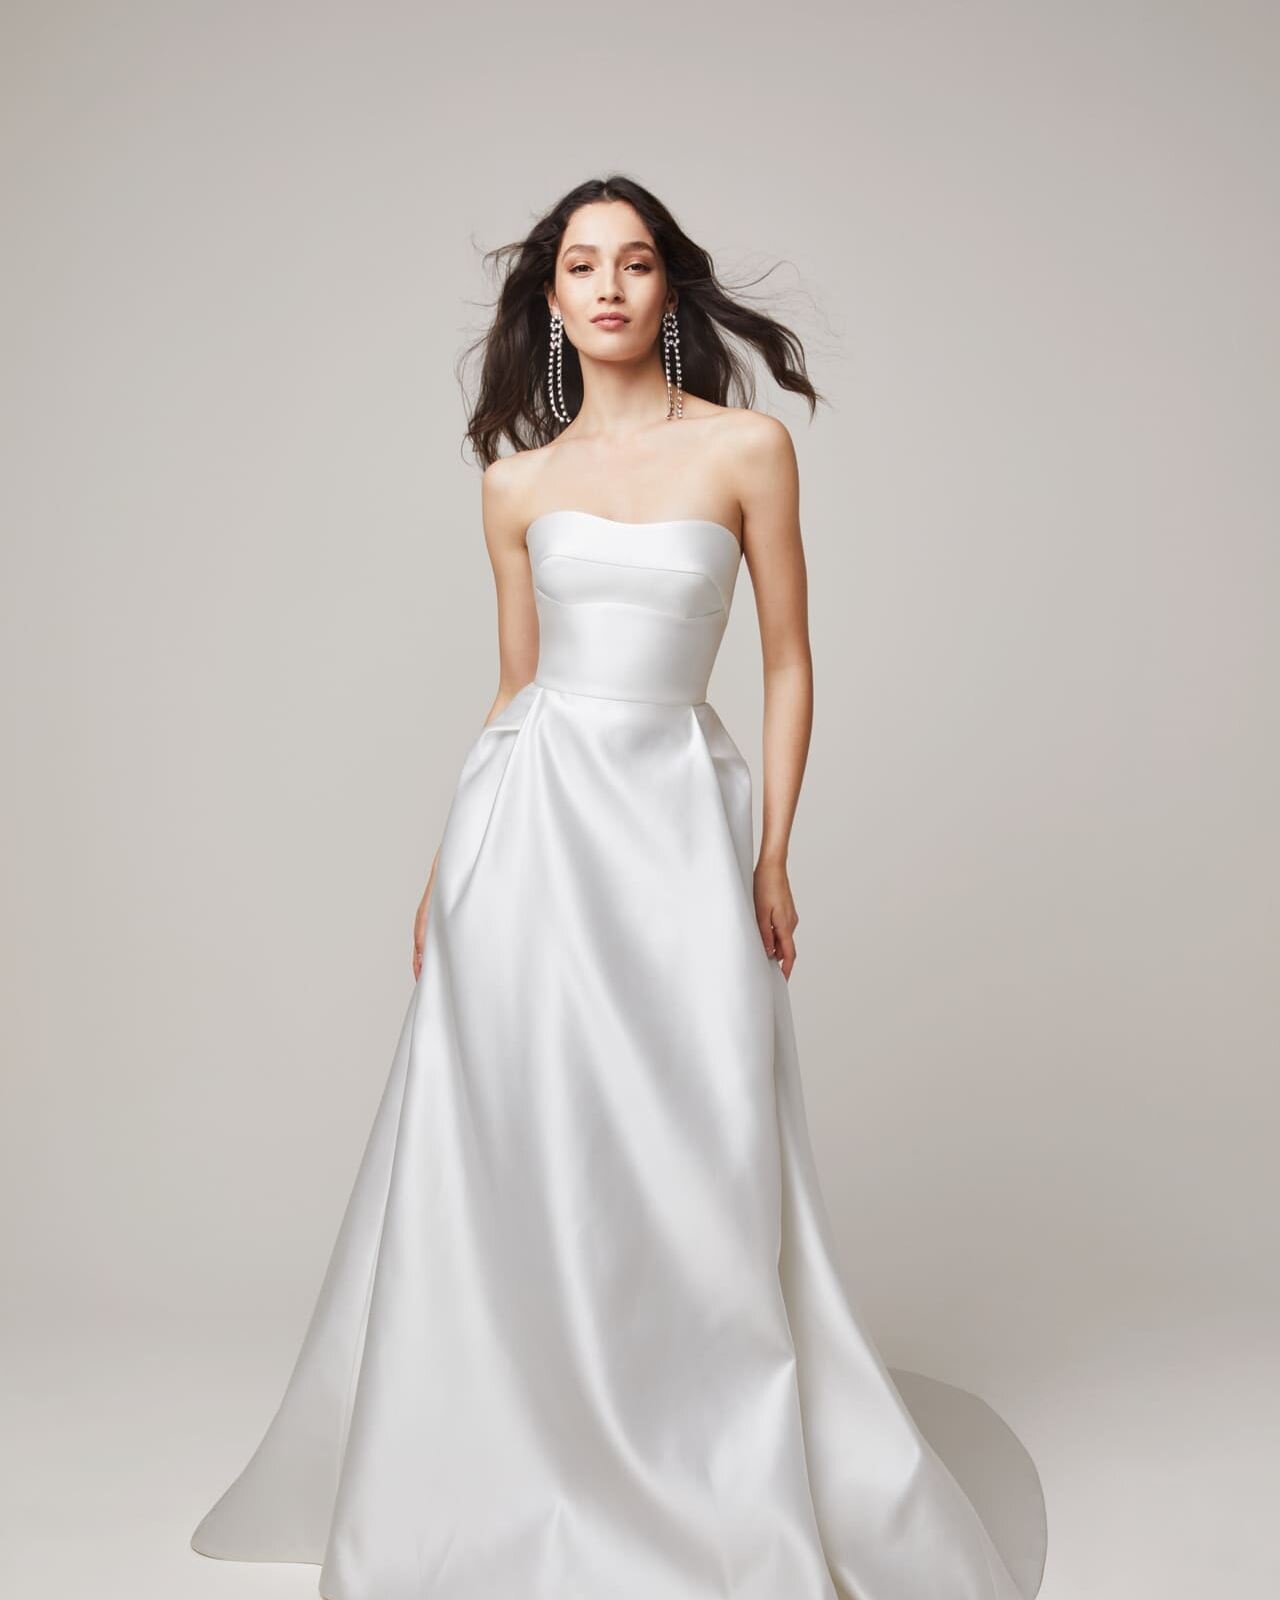 Feeling a little scared of strapless?! 

A strapless dress made well with the right structure will not have you constantly pulling it up through the big day. All too often brides are a little nervous about trying a strapless option - but give them a 